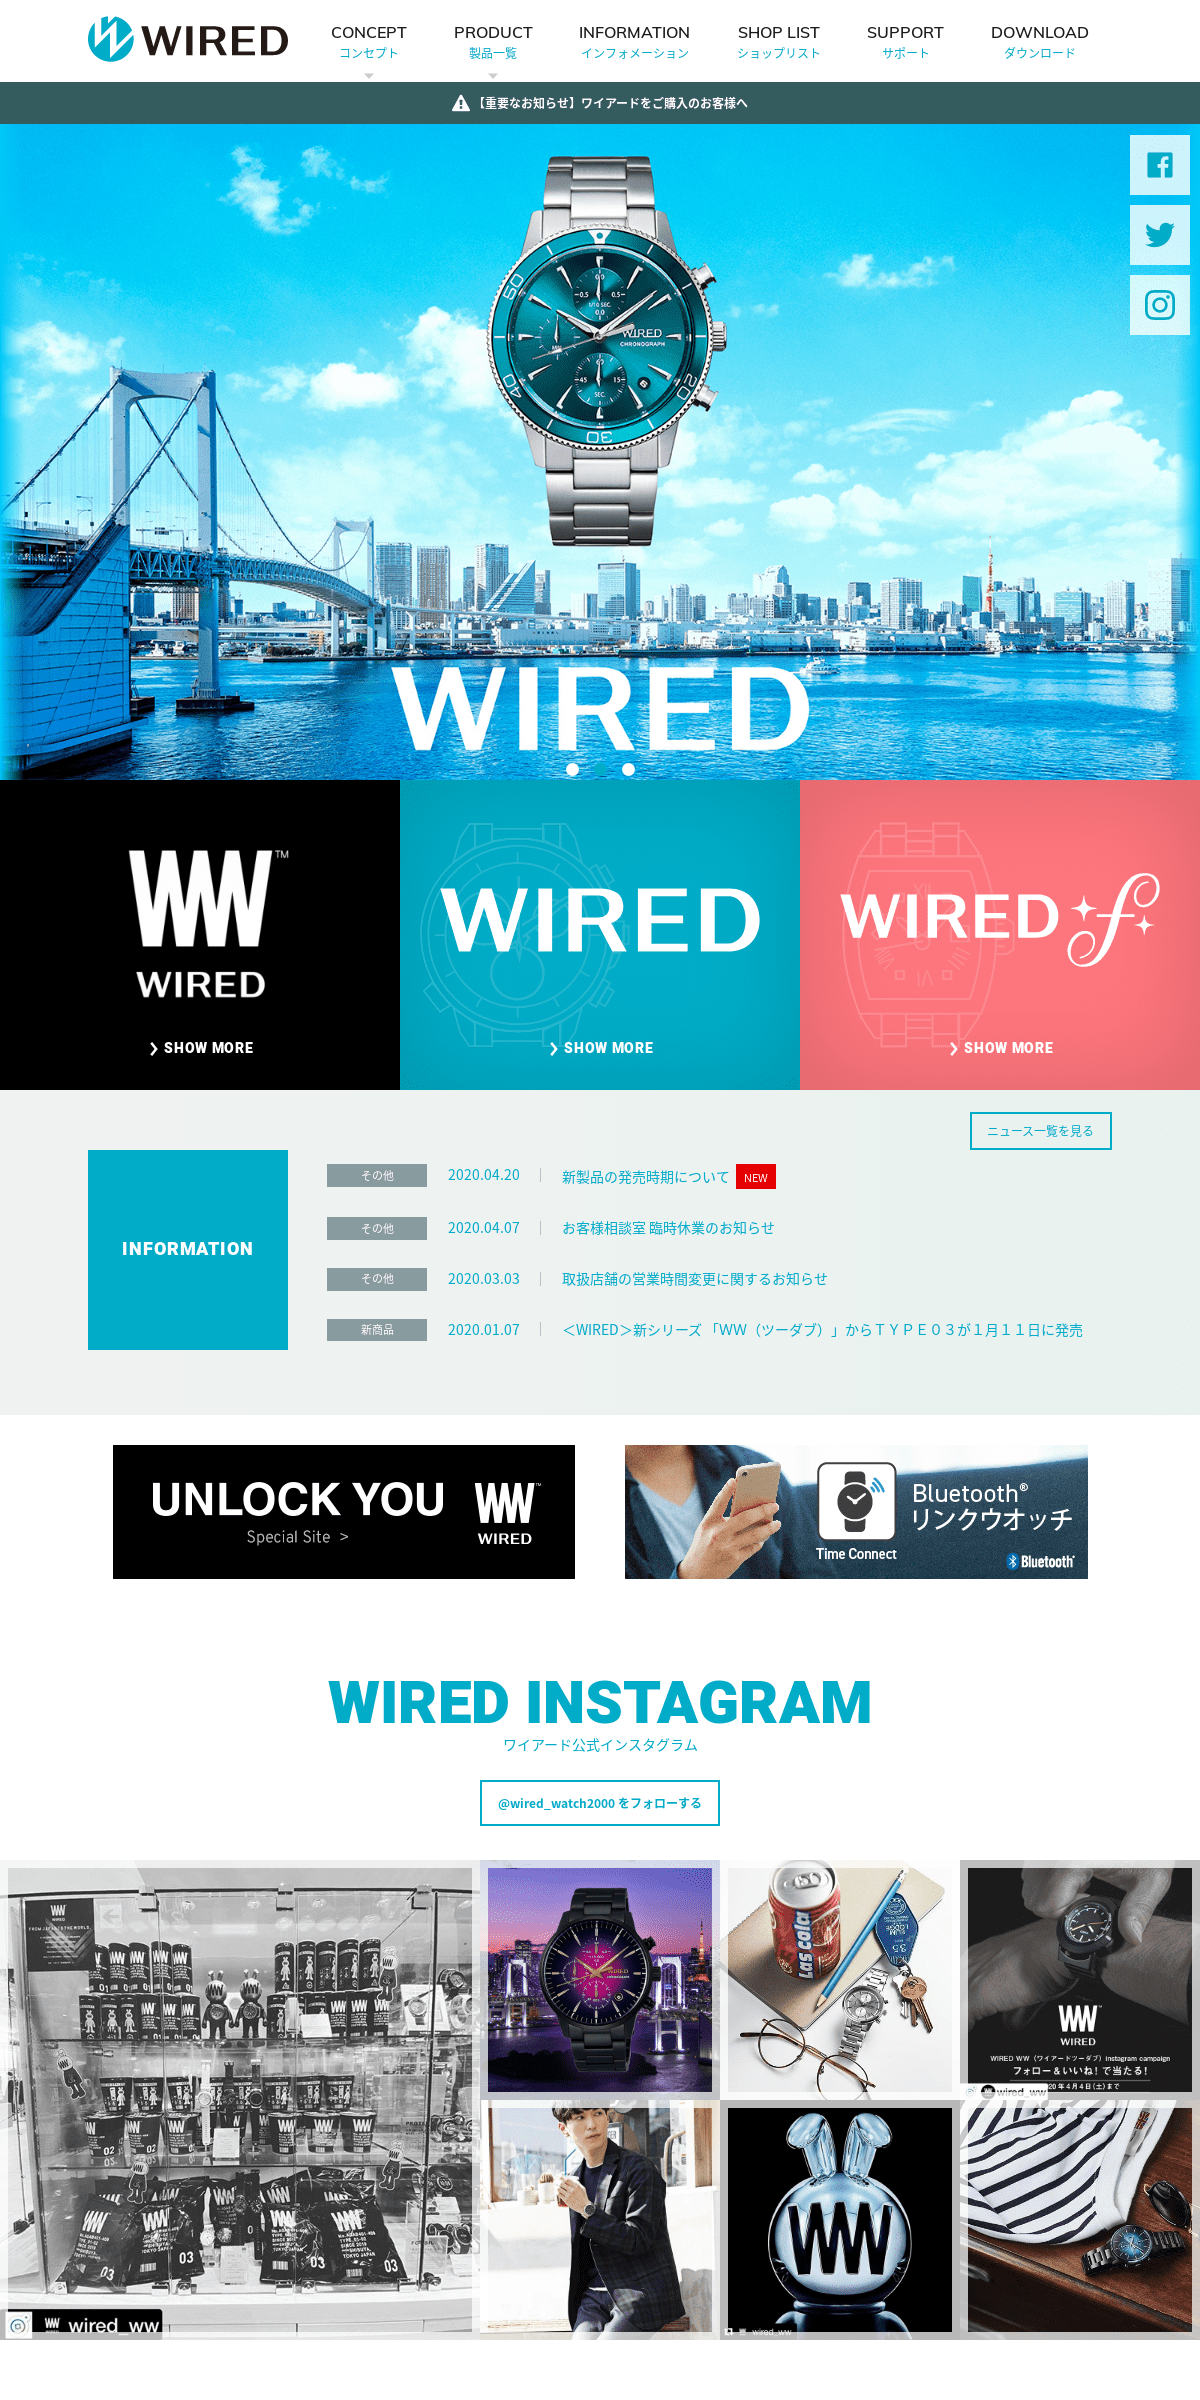 A complete backup of w-wired.com